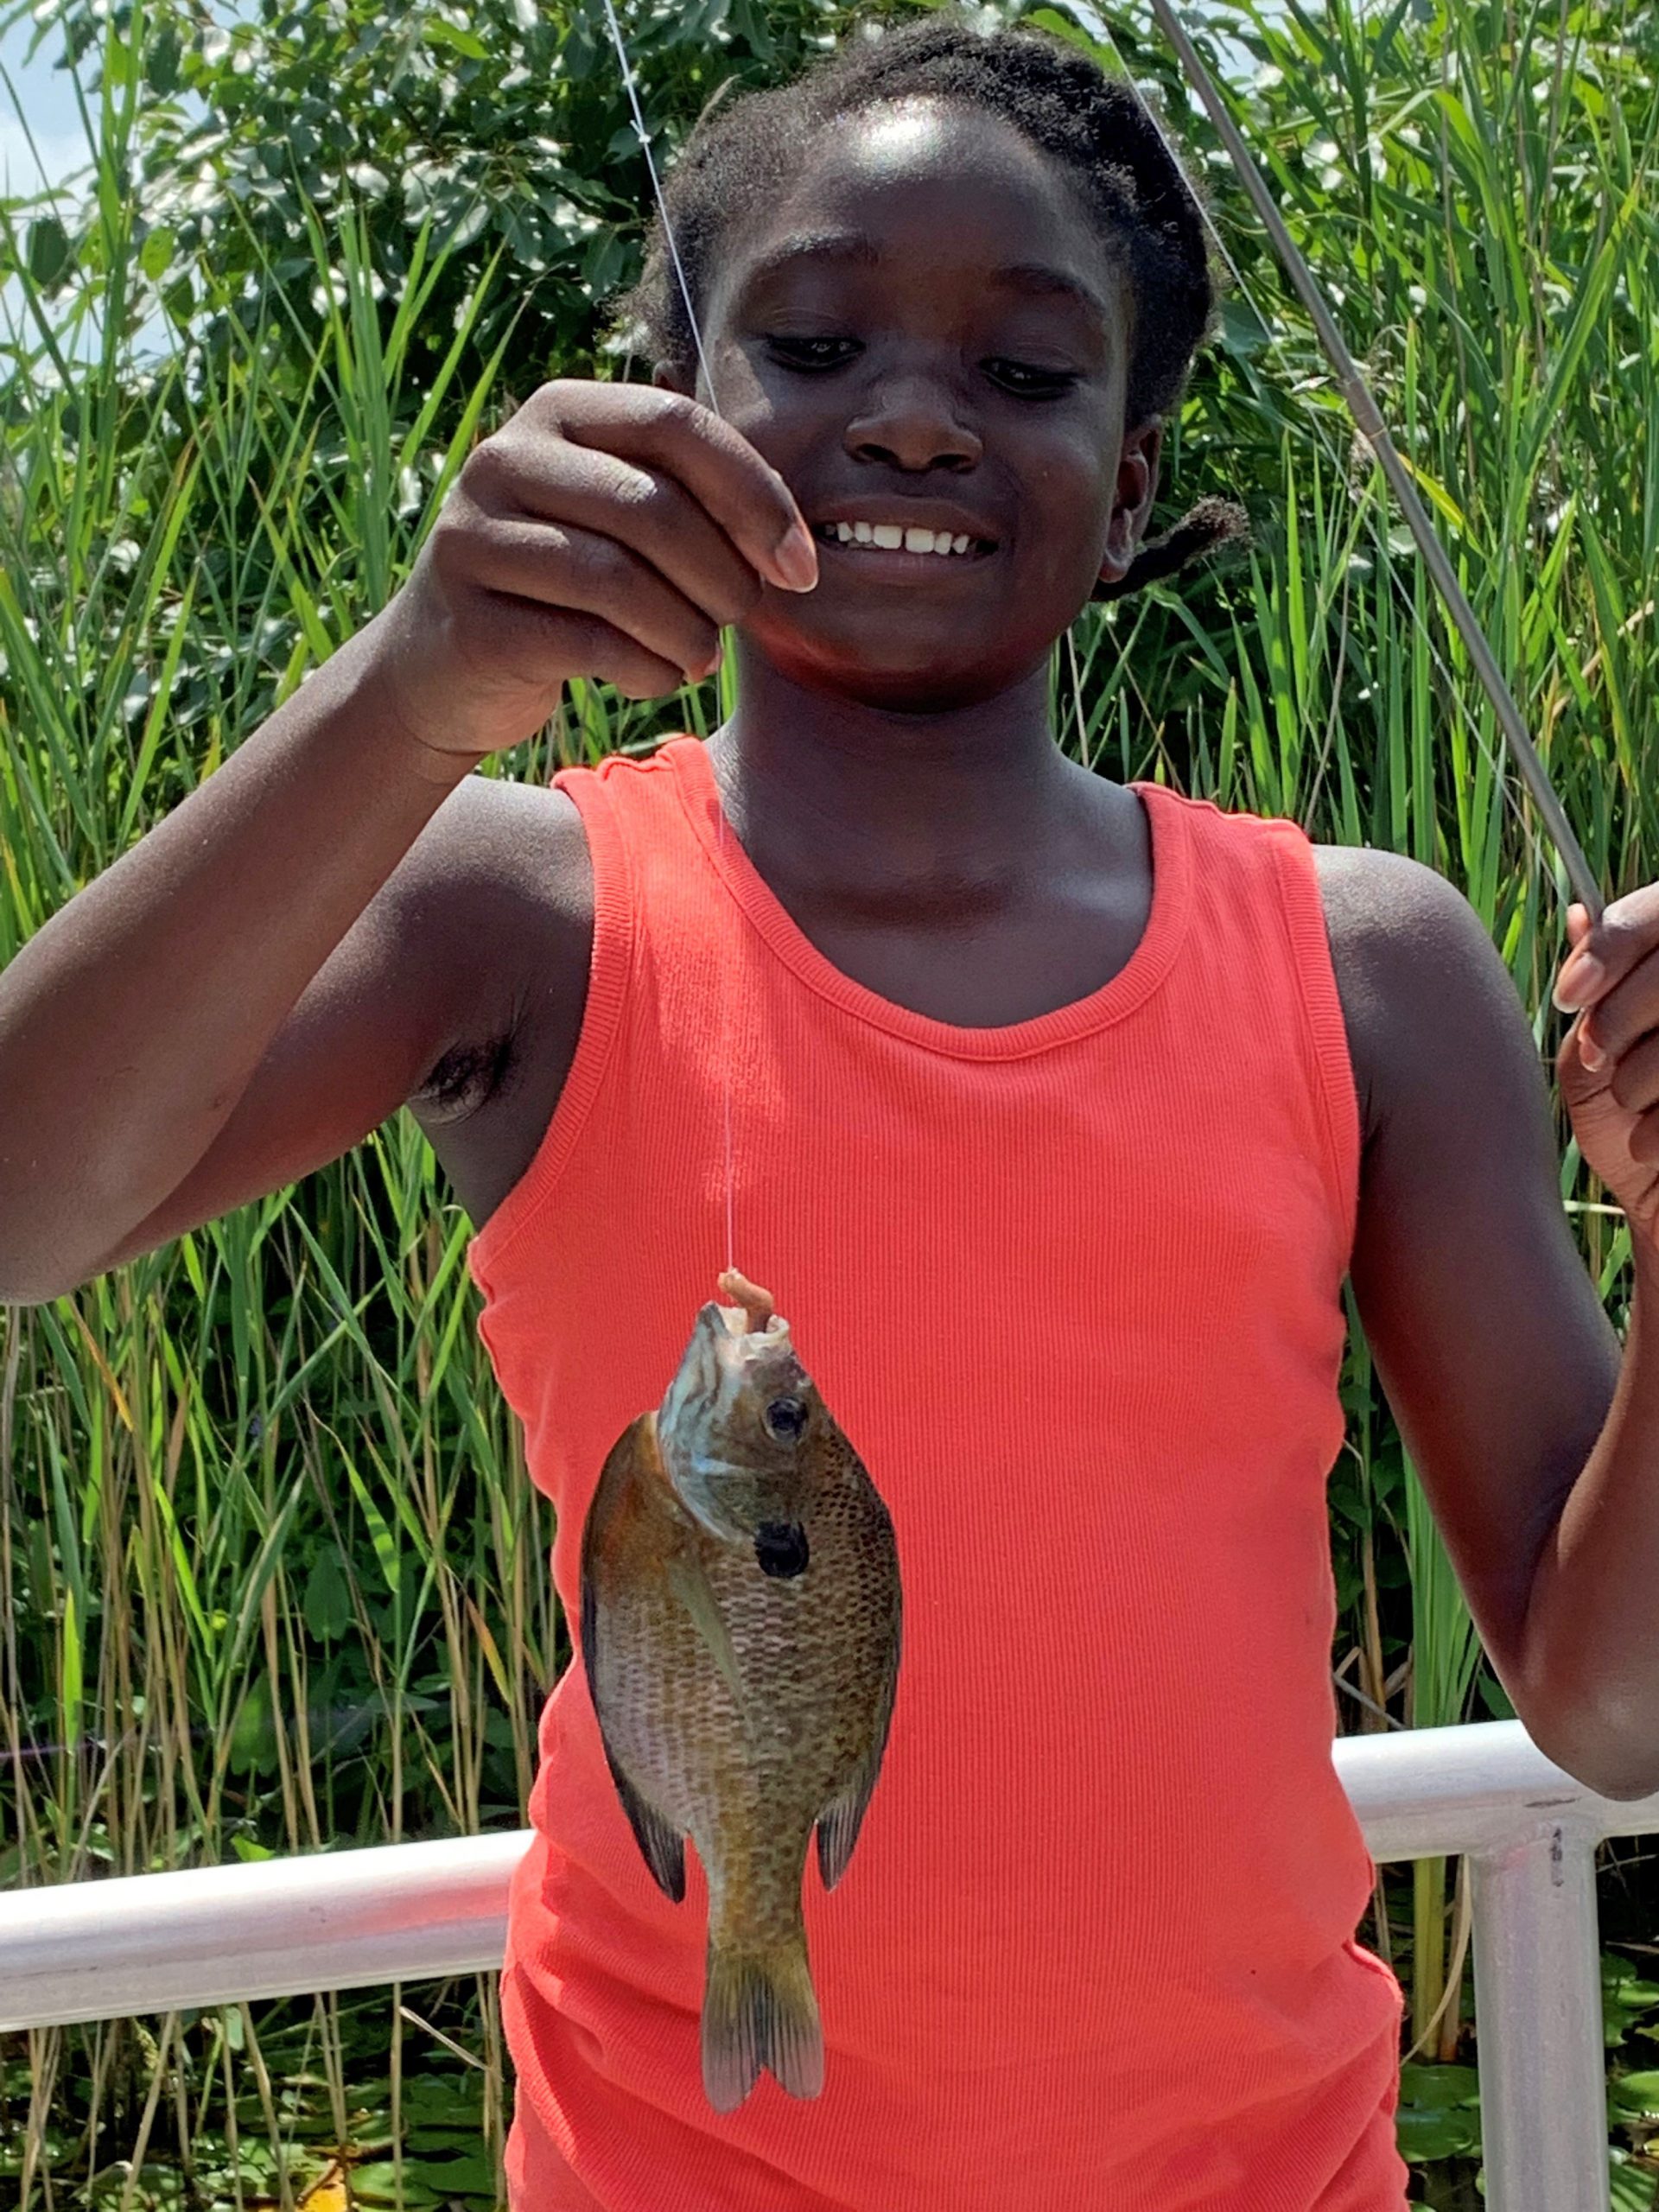 DNREC Announces 'Take a Kid Fishing!' Spring Events - State of Delaware News